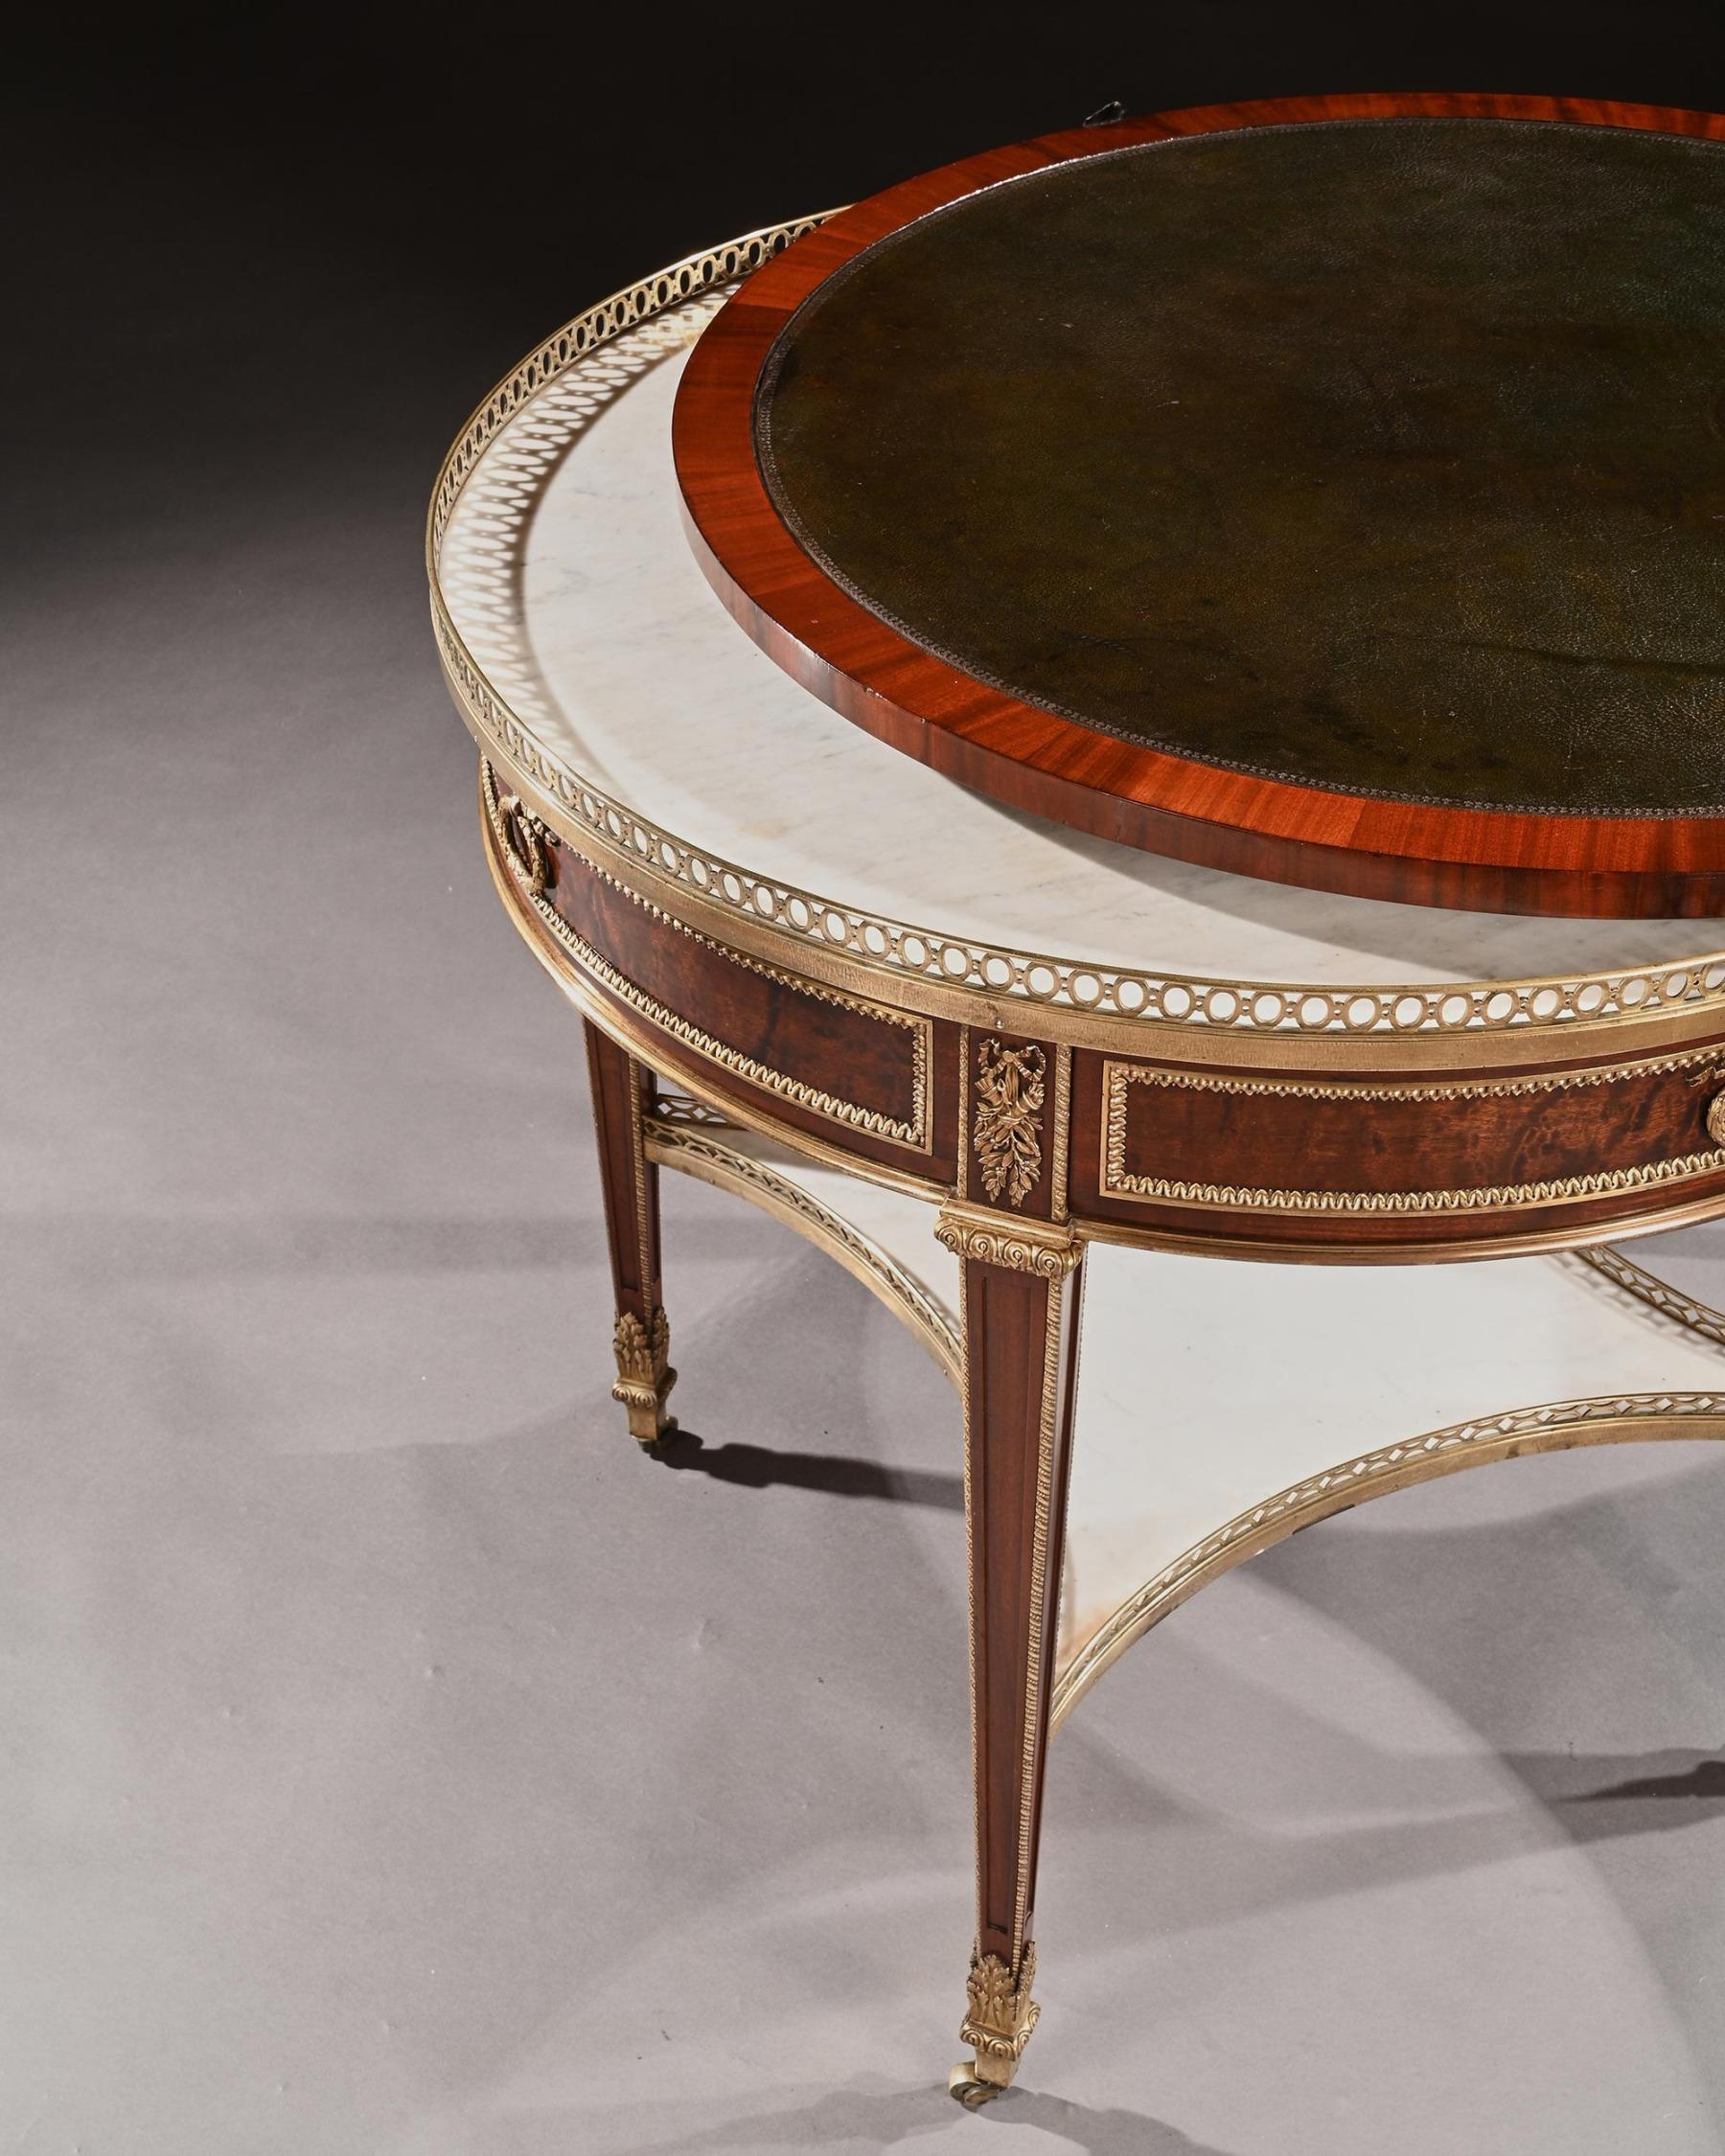 Exceptional G. Durand 19th C. Mahogany & Gilt Bronze Gueridon Bouillotte Table 4